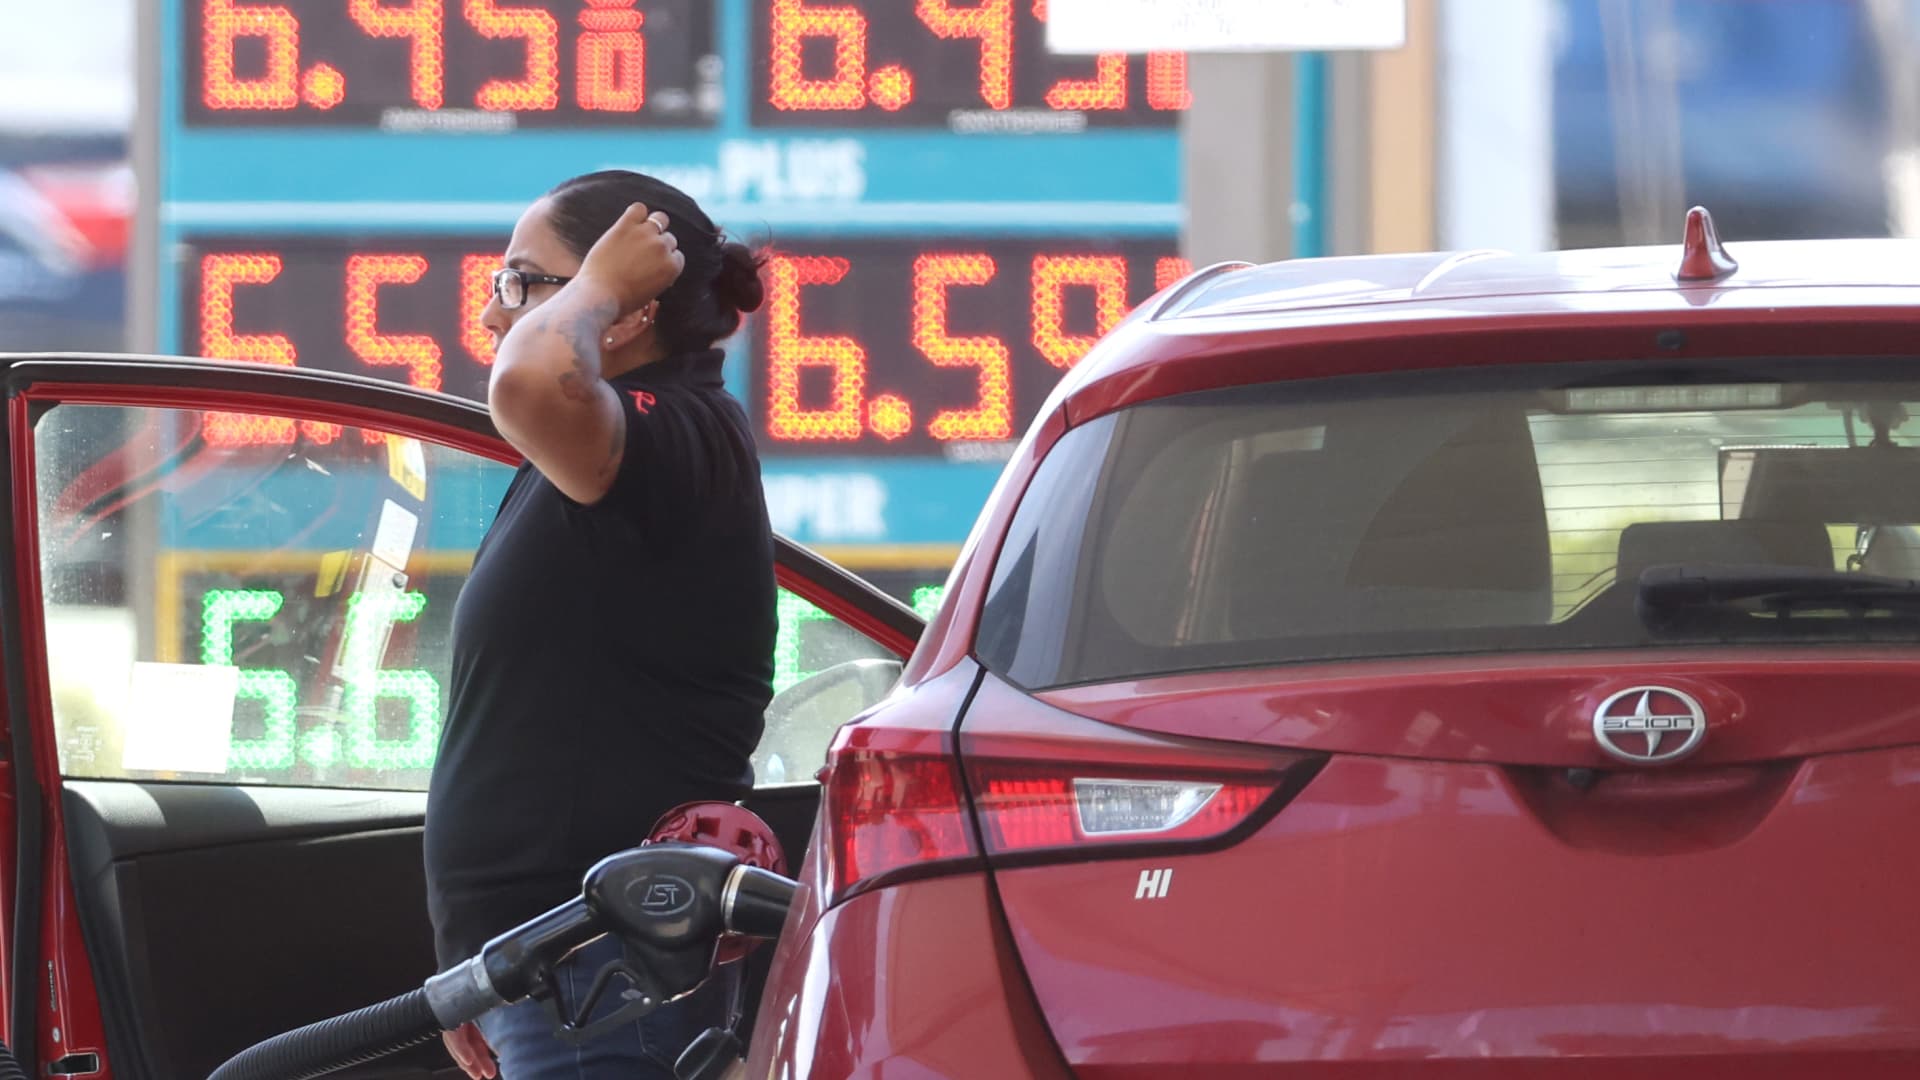 How to save money on gas, with or without a federal gas tax holiday